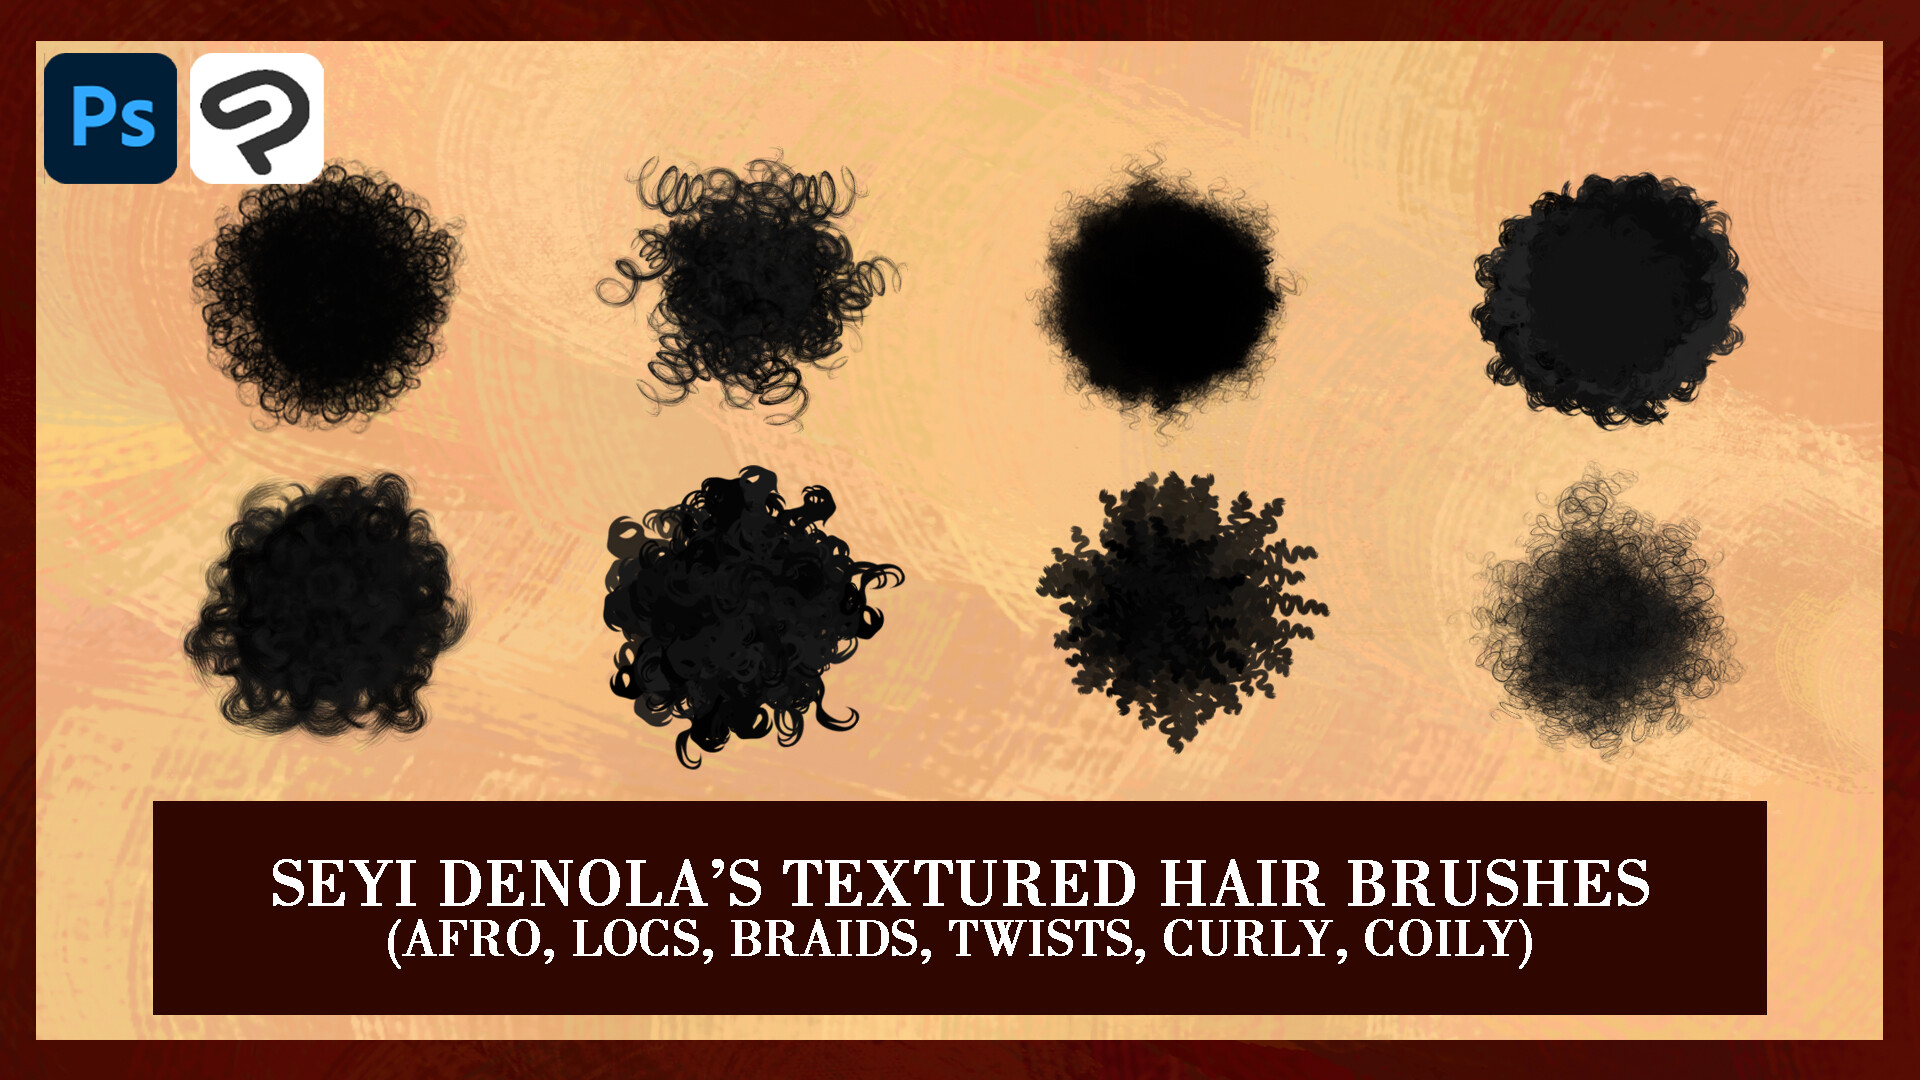 ArtStation - textured hair brush packs for csp and photoshop